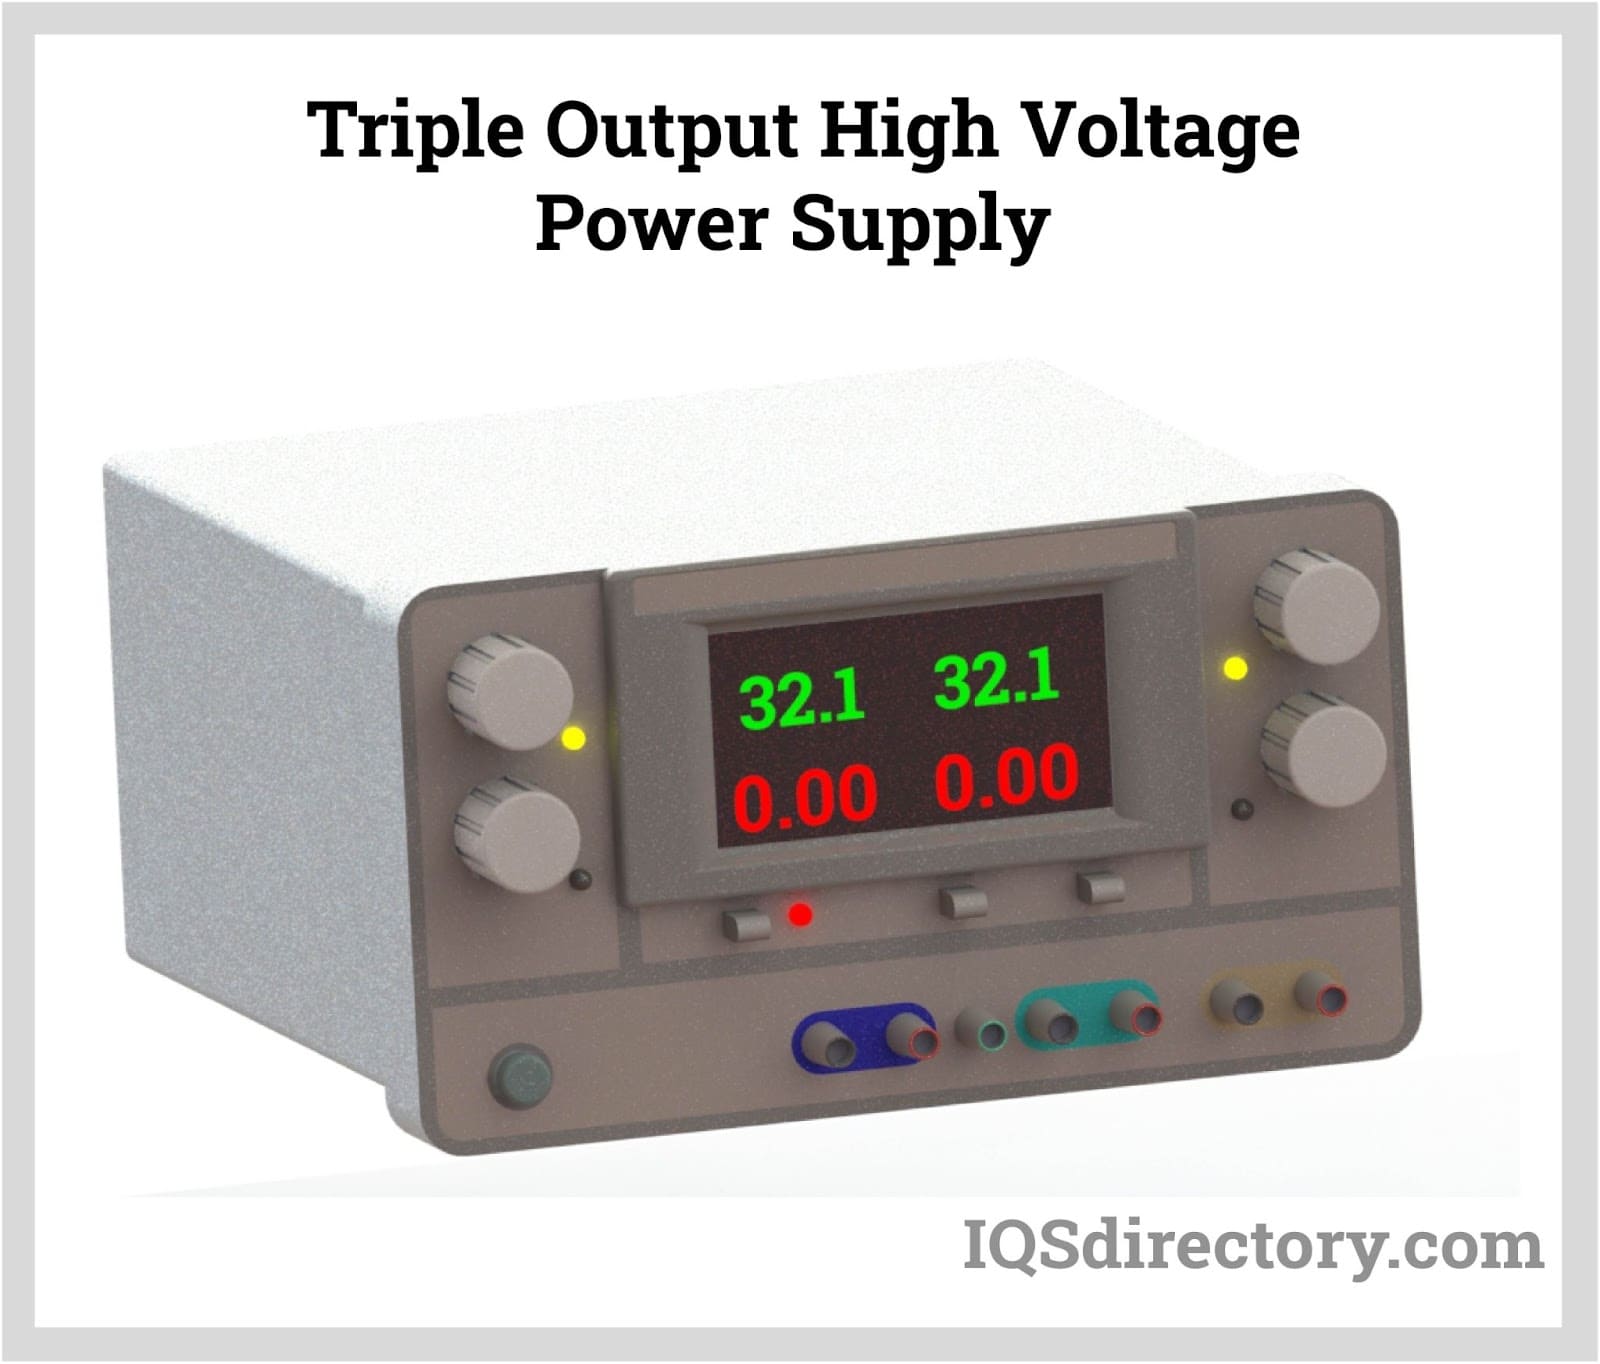 Triple Output High Voltage Power Supply